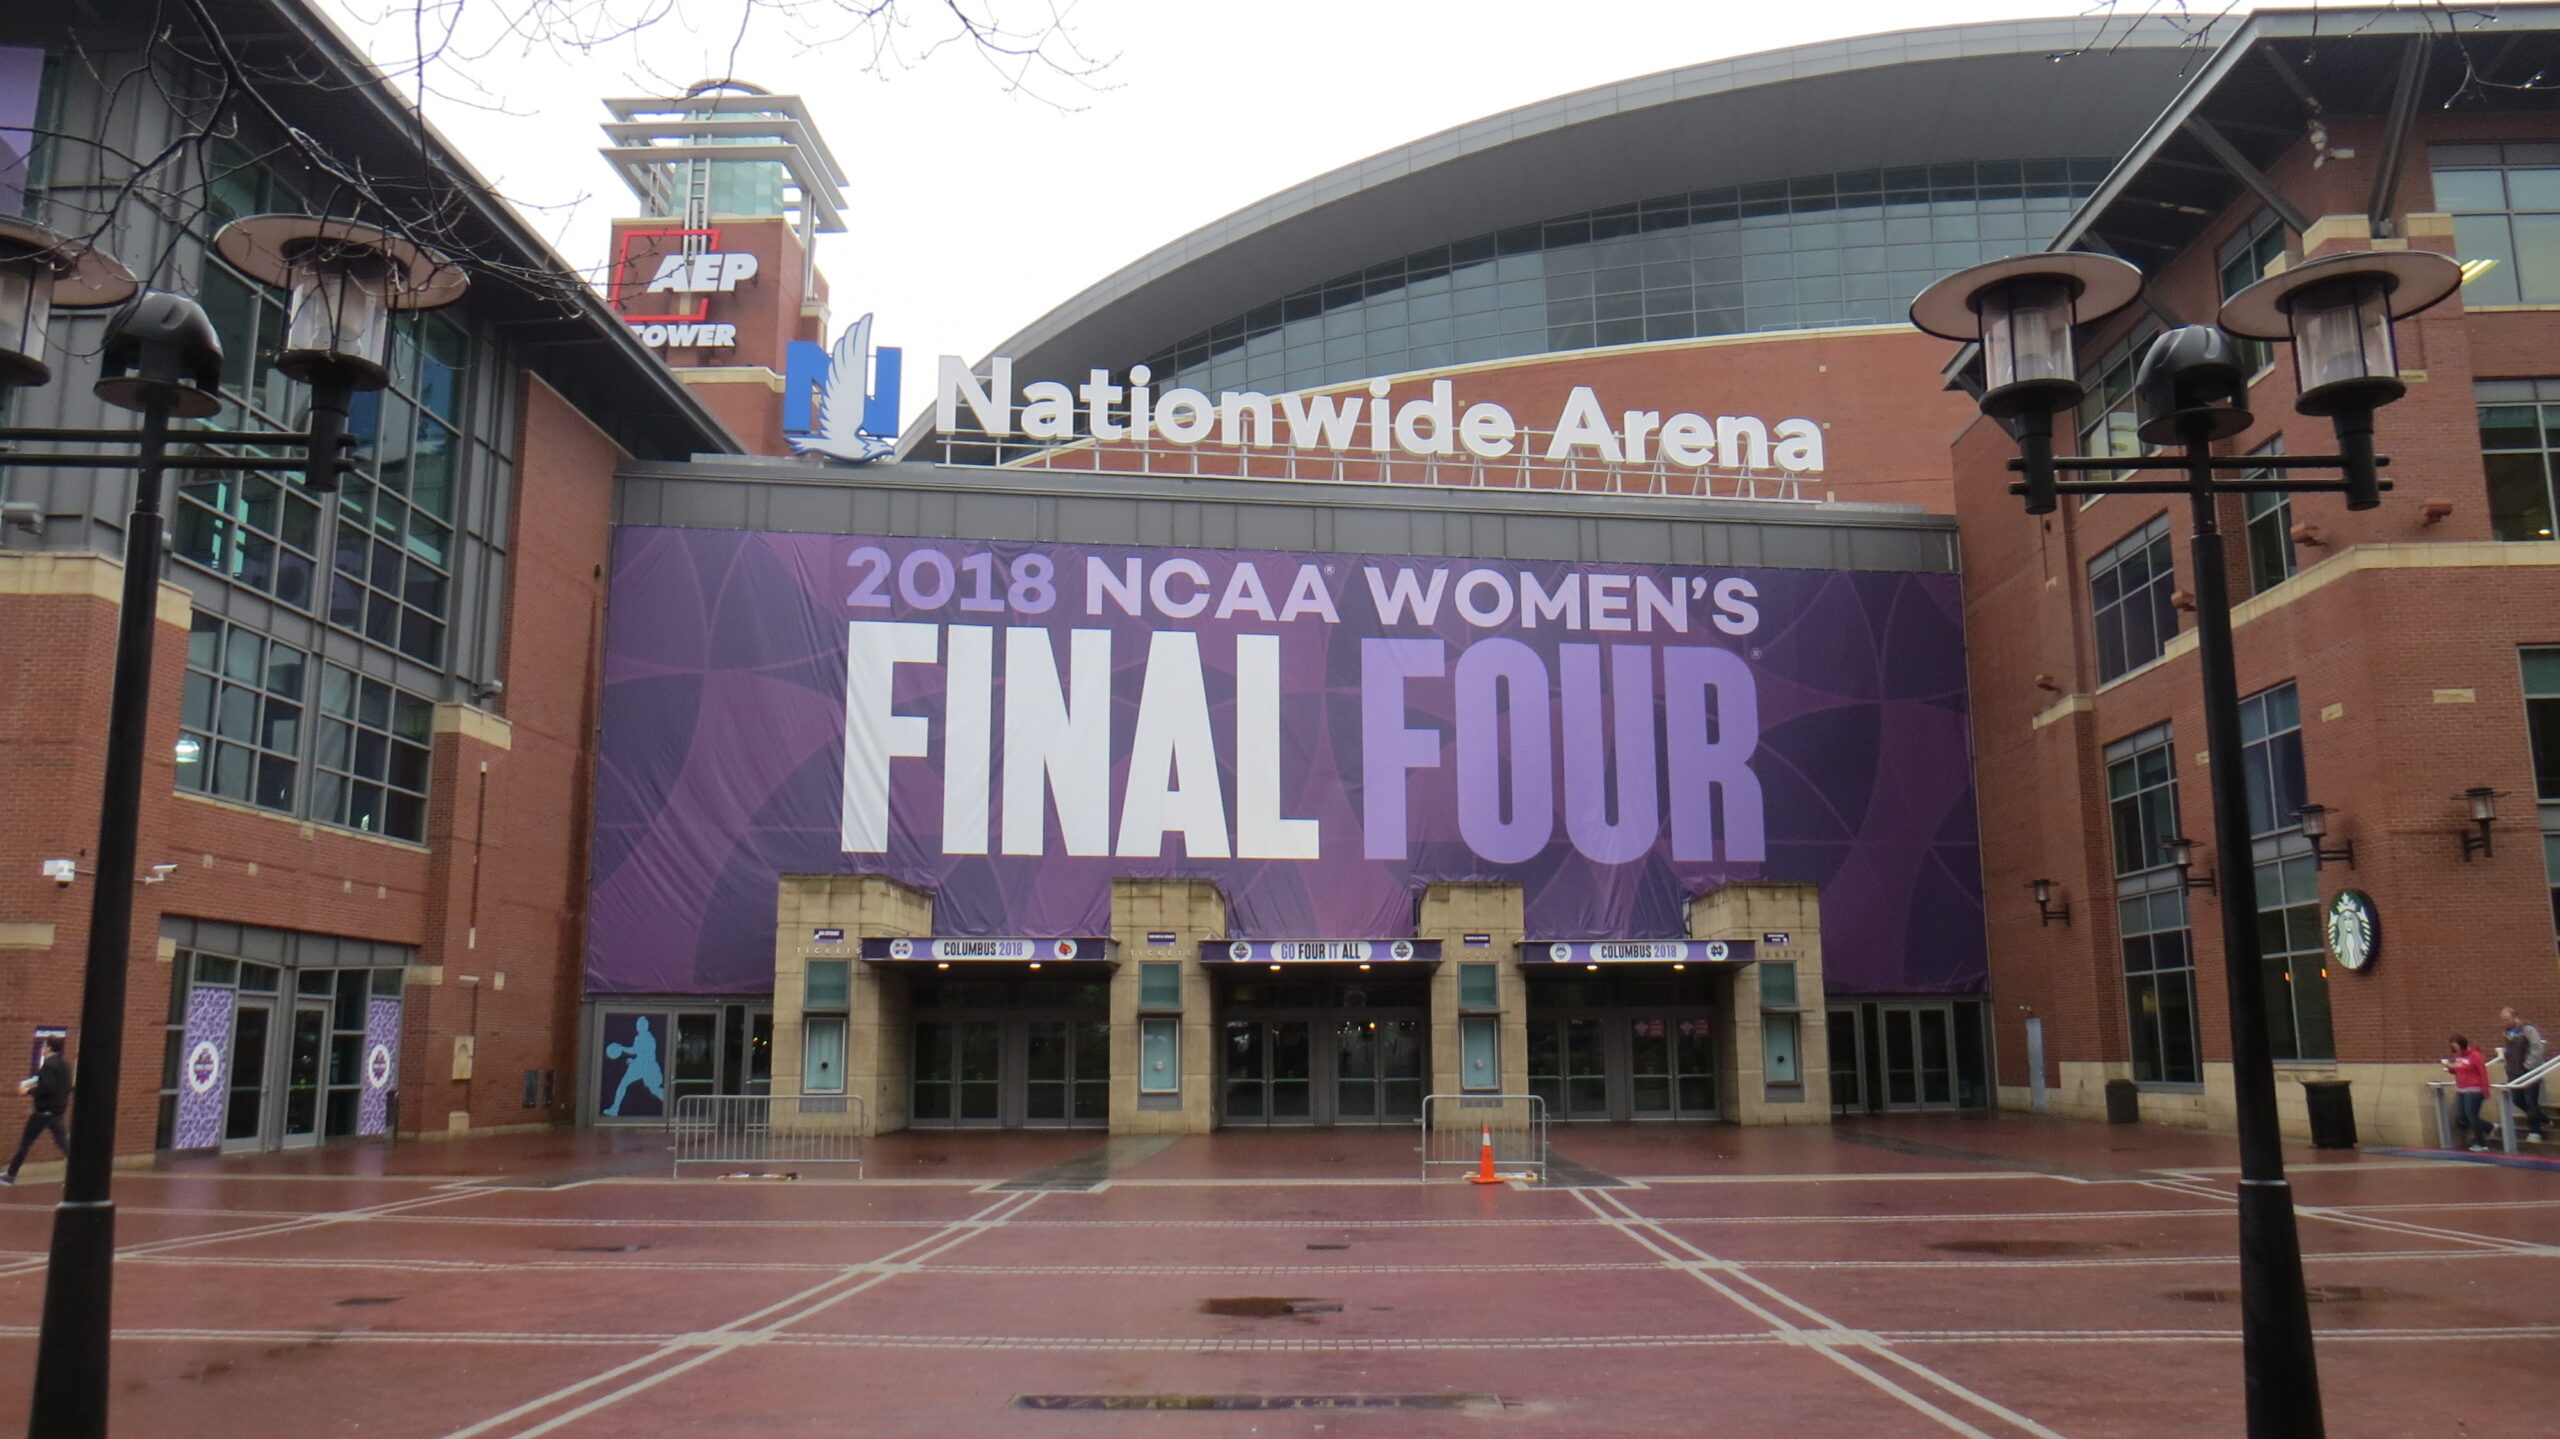 Statistically, 2018 Final Four in Columbus was a success story